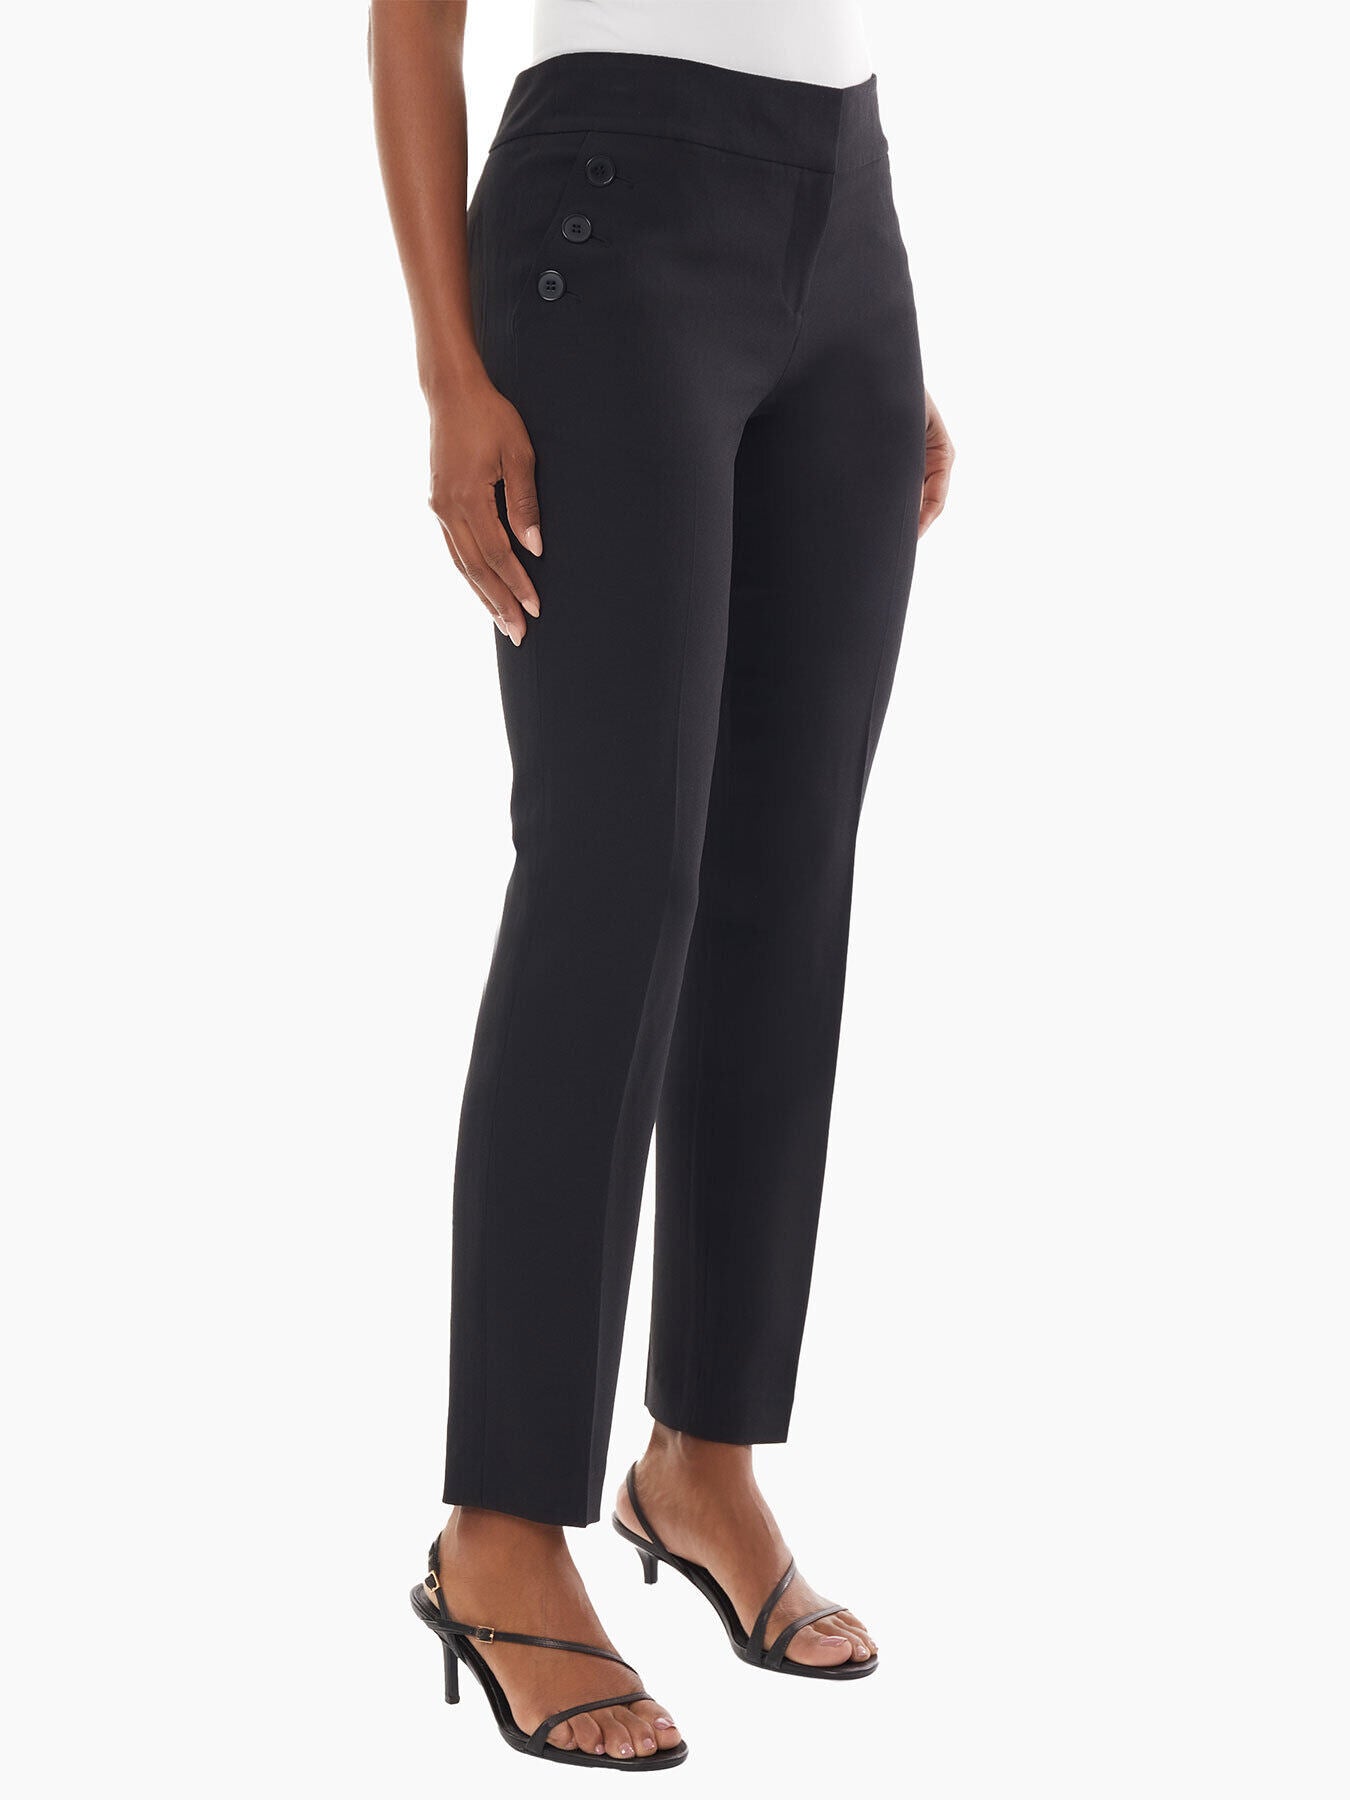 Kasper Plus Size Flat Front High Waisted Extended Tab Coordinating Trouser  Pants